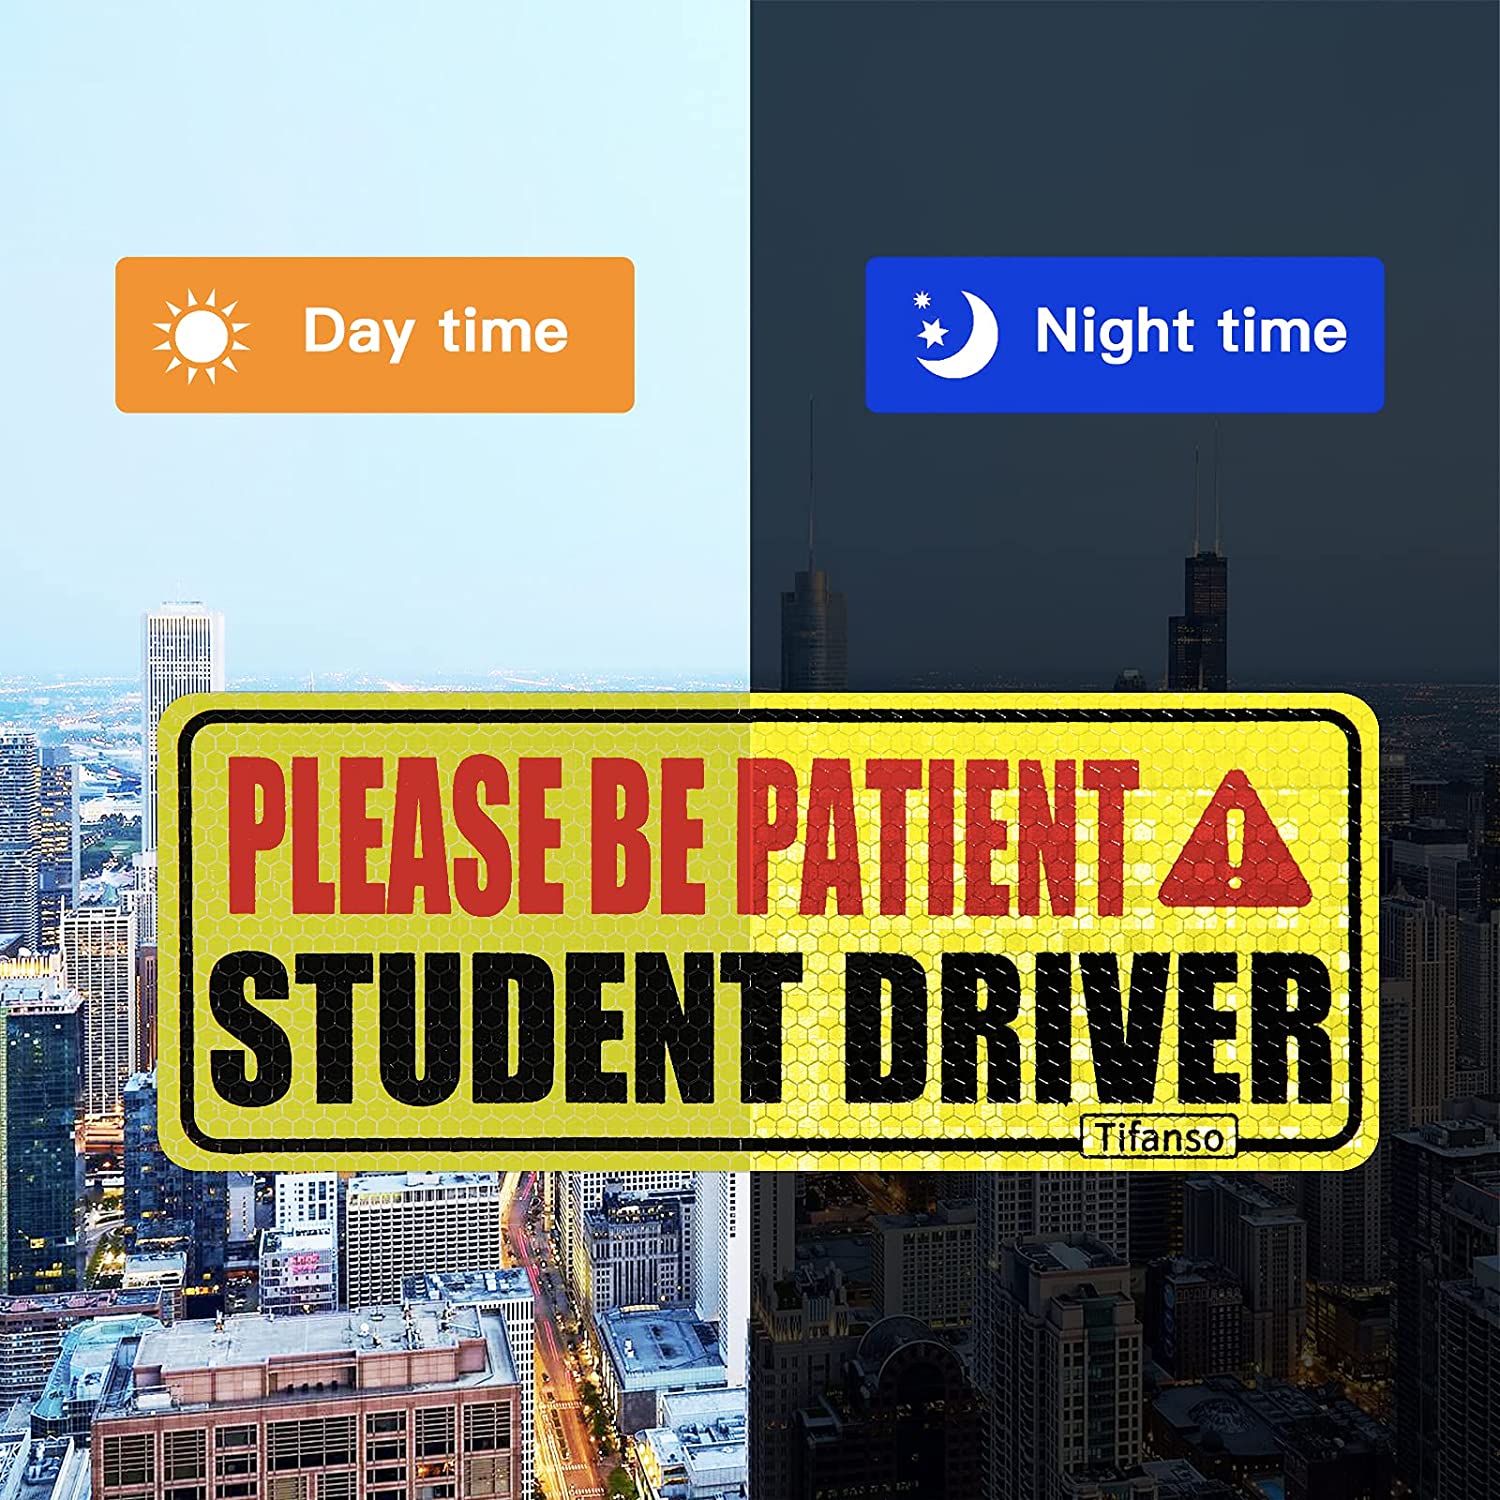 Tifanso Student Driver Car Magnet, Reflective Student Driver Signs for Car, New Driver Magnetic Sticker, Safety Sign Vehicle Bumper Magnet for New Driver (Set of 3)